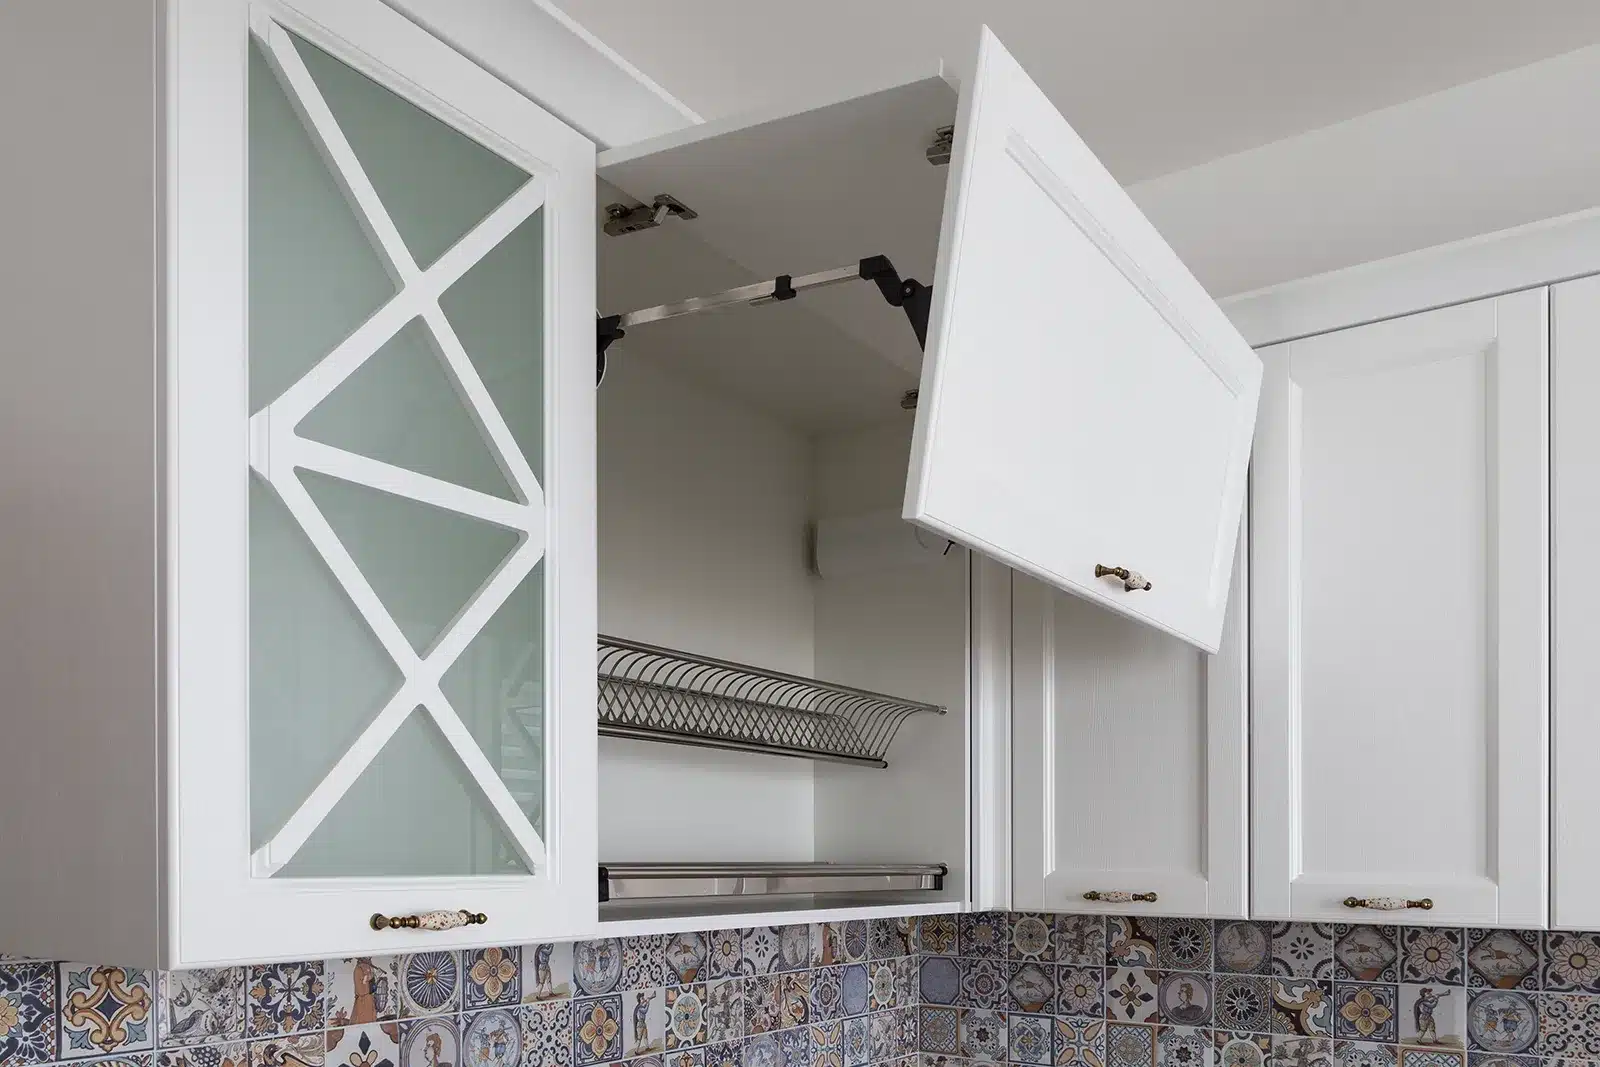 White kitchen upper cabinets with top hinges opening upwards, featuring frosted glass with a geometric pattern, over a decorative tiled backsplash.